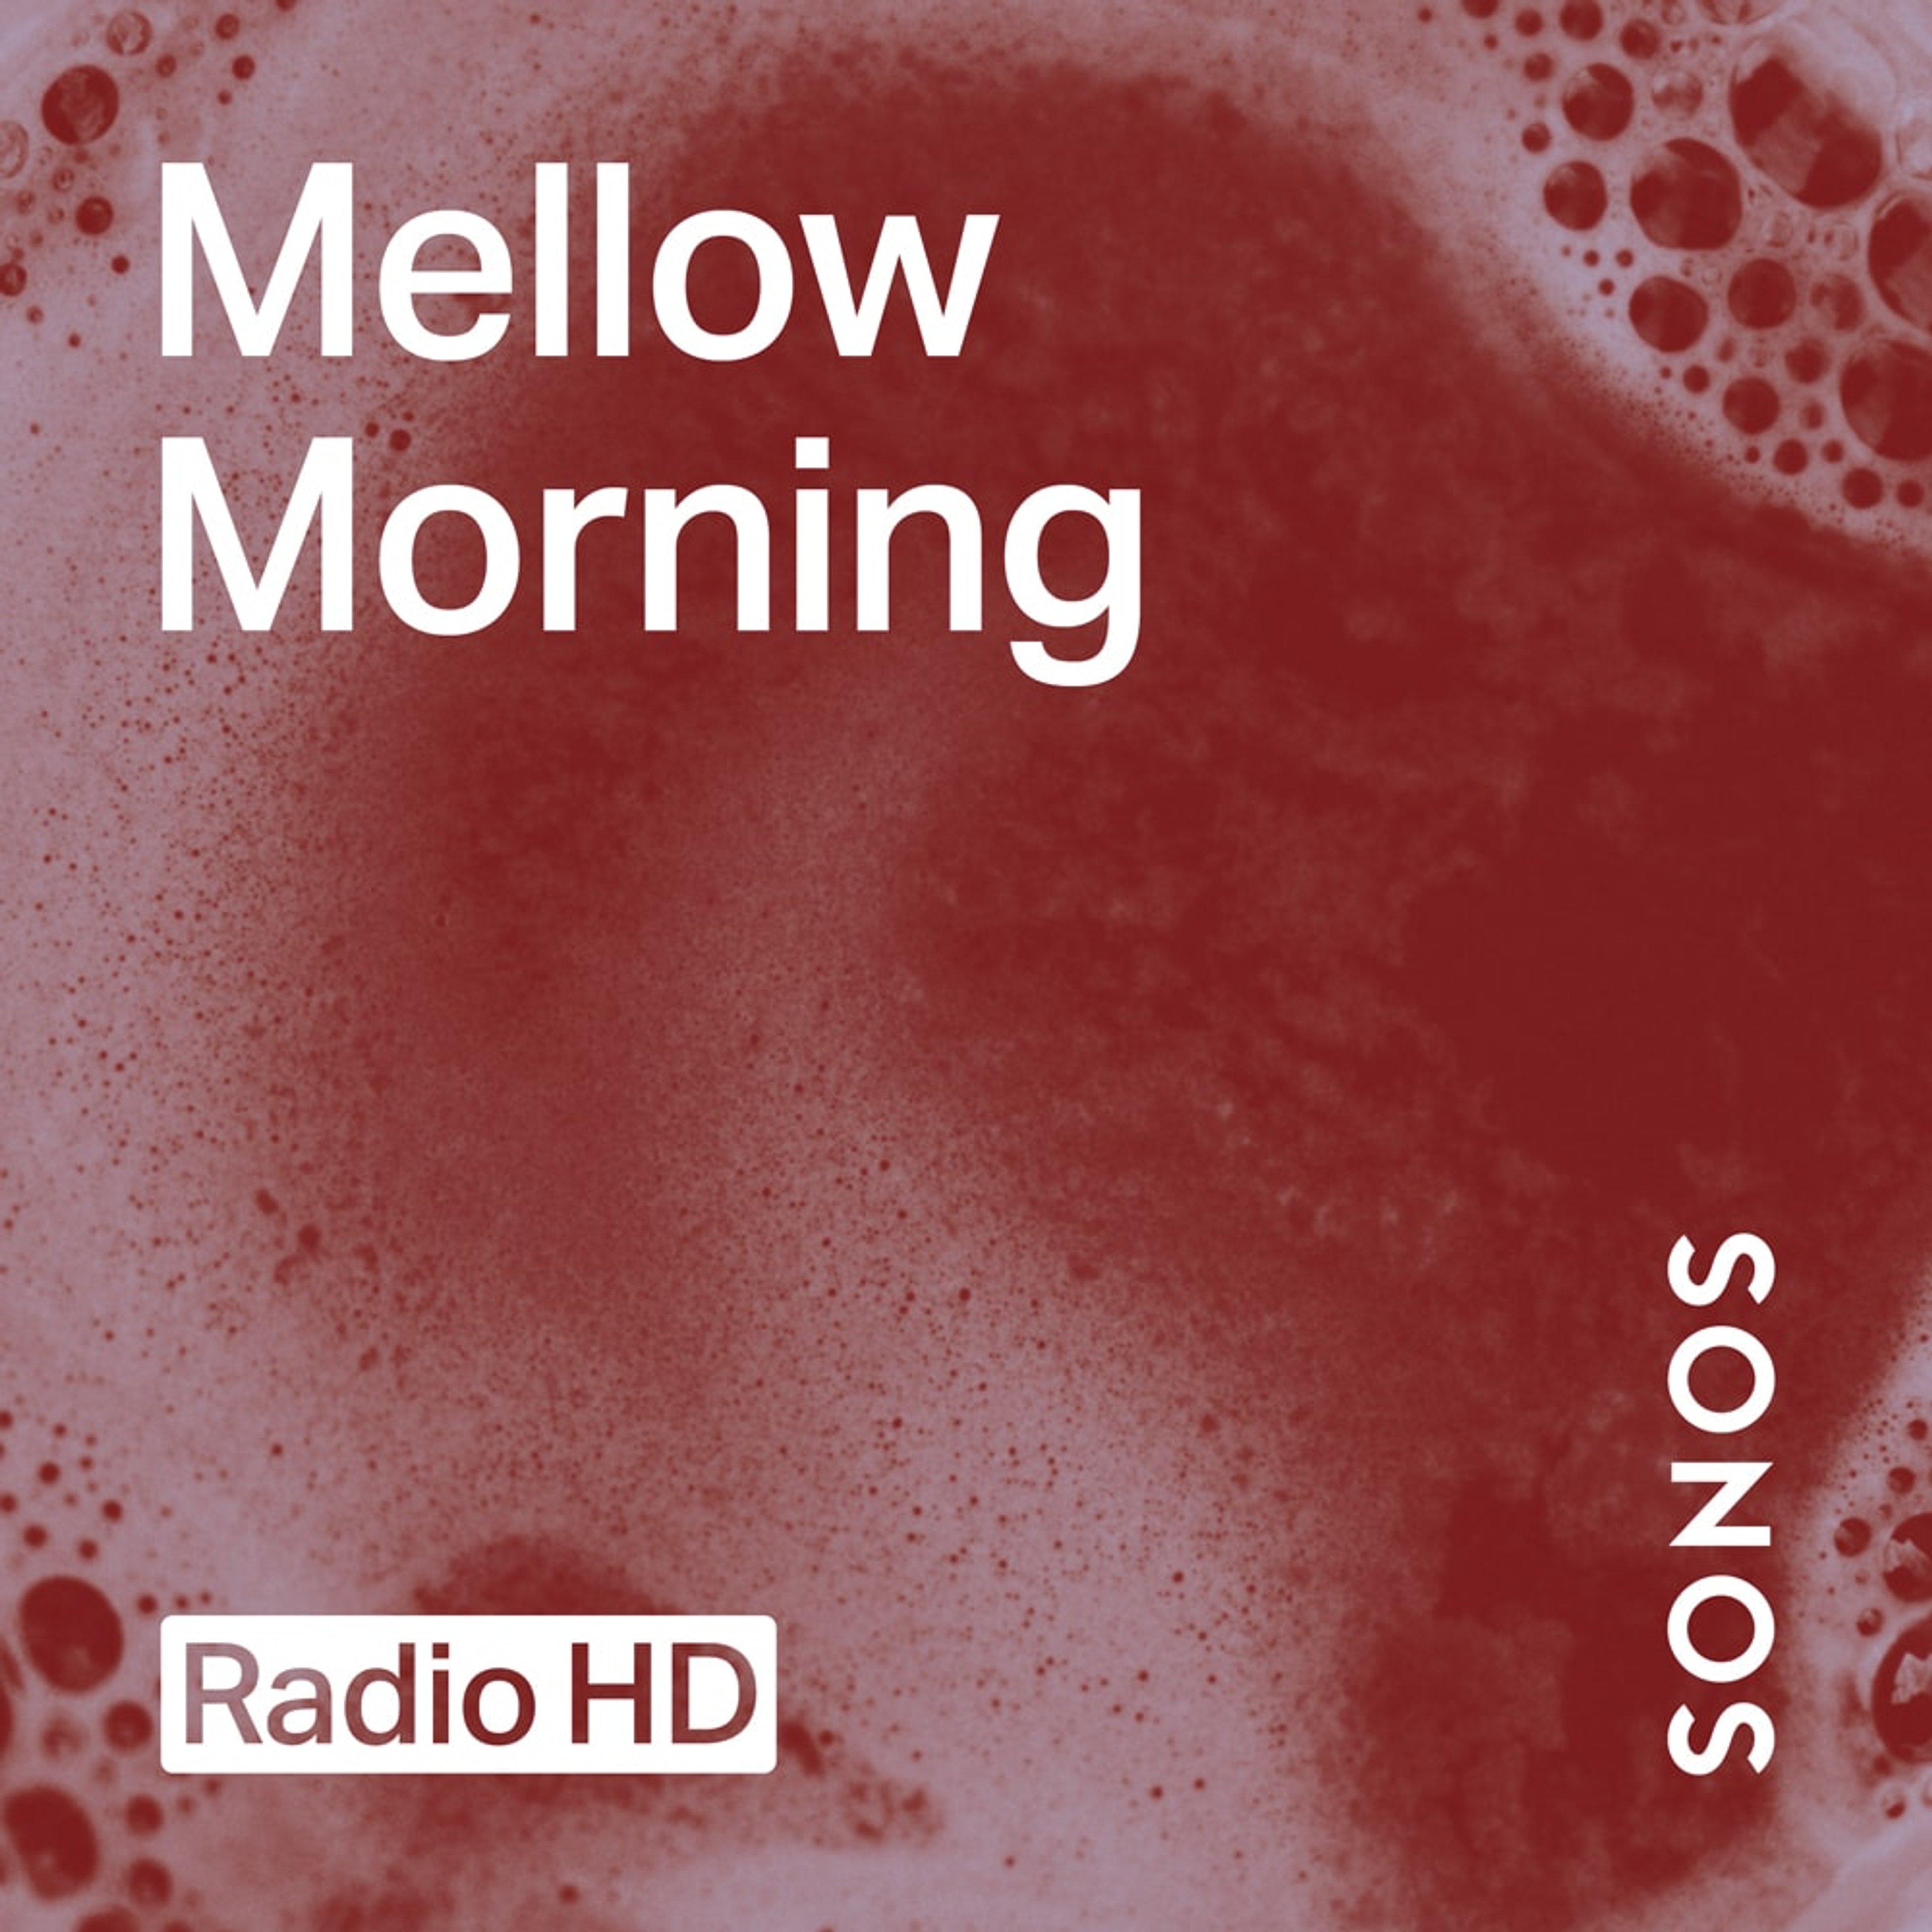 Mellow Morning Radio station cover